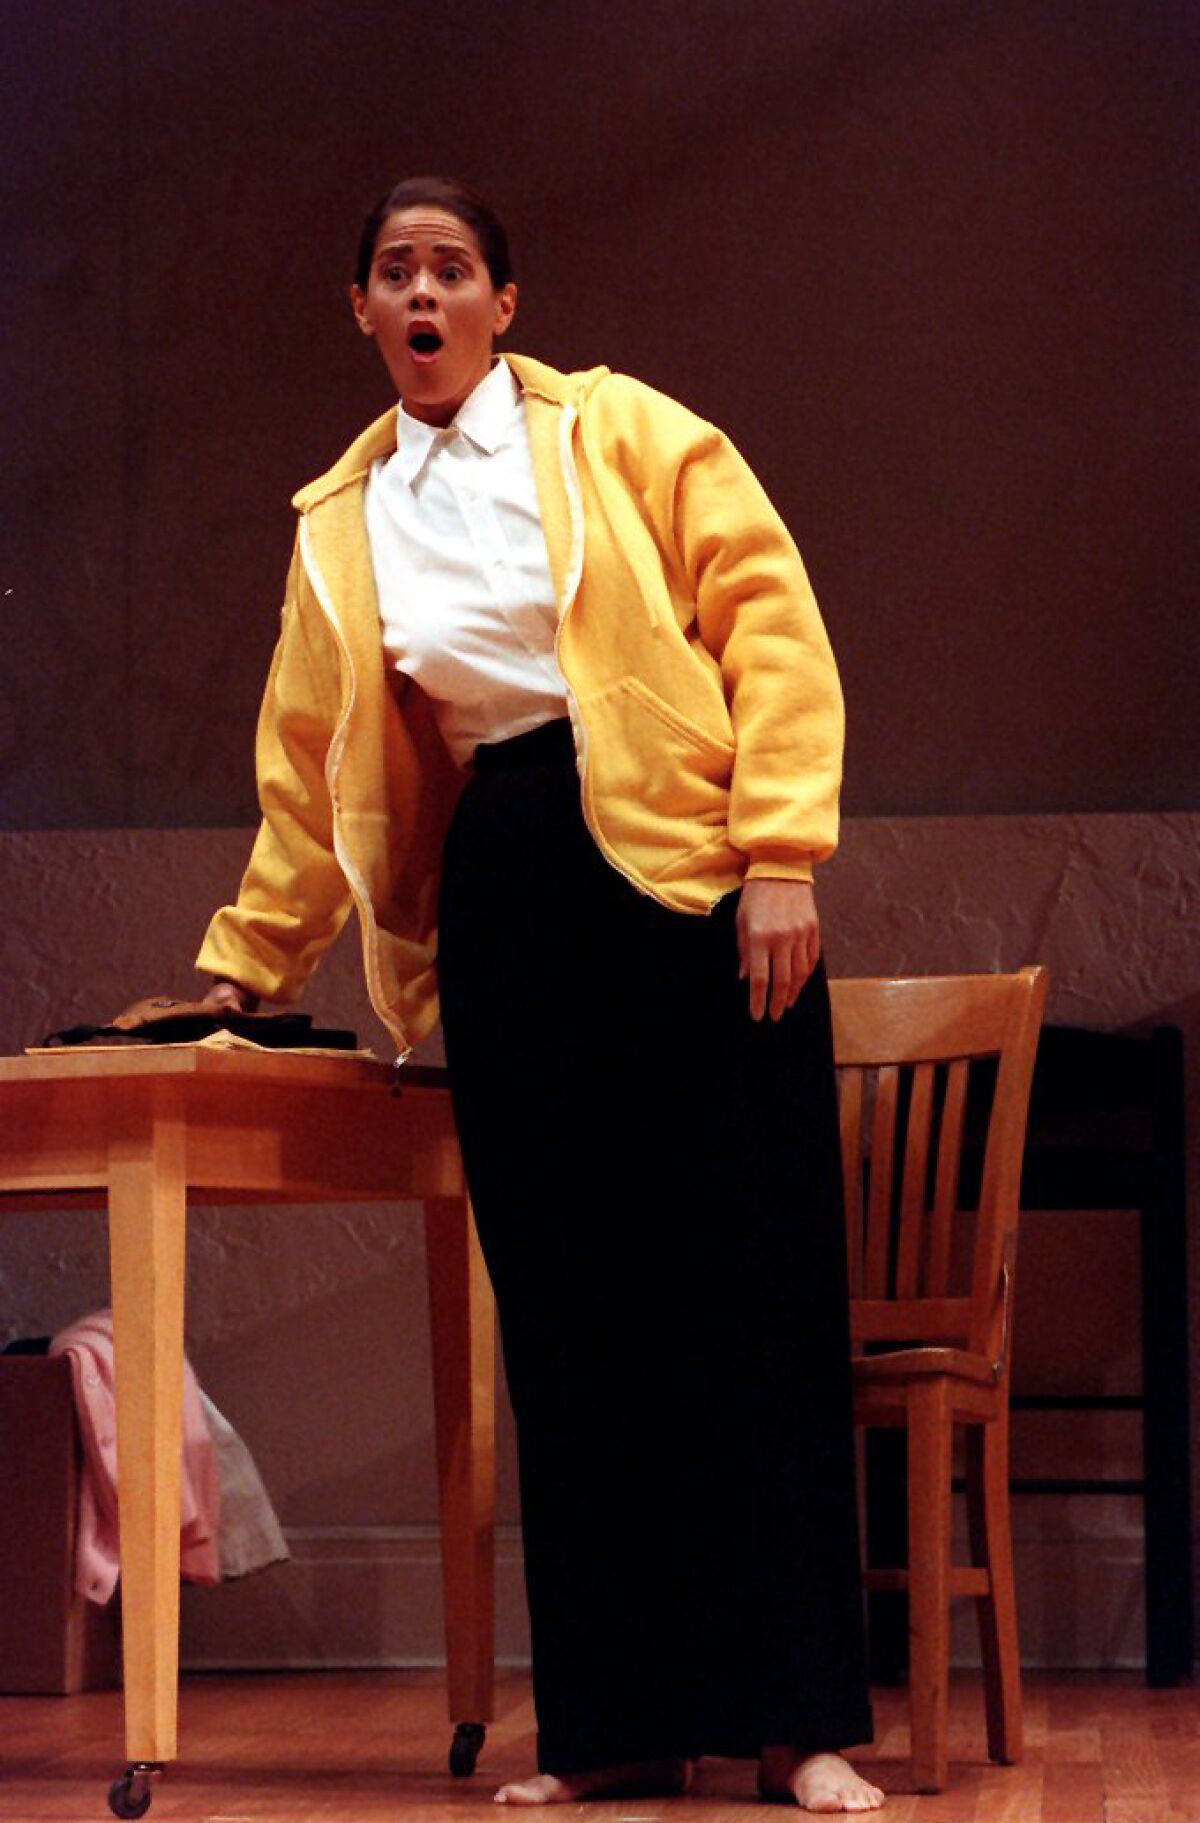 Anna Deavere Smith portraying Reginald Denny in "Twilight: Los Angeles, 1992," about the riots that followed the Rodney King verdict.